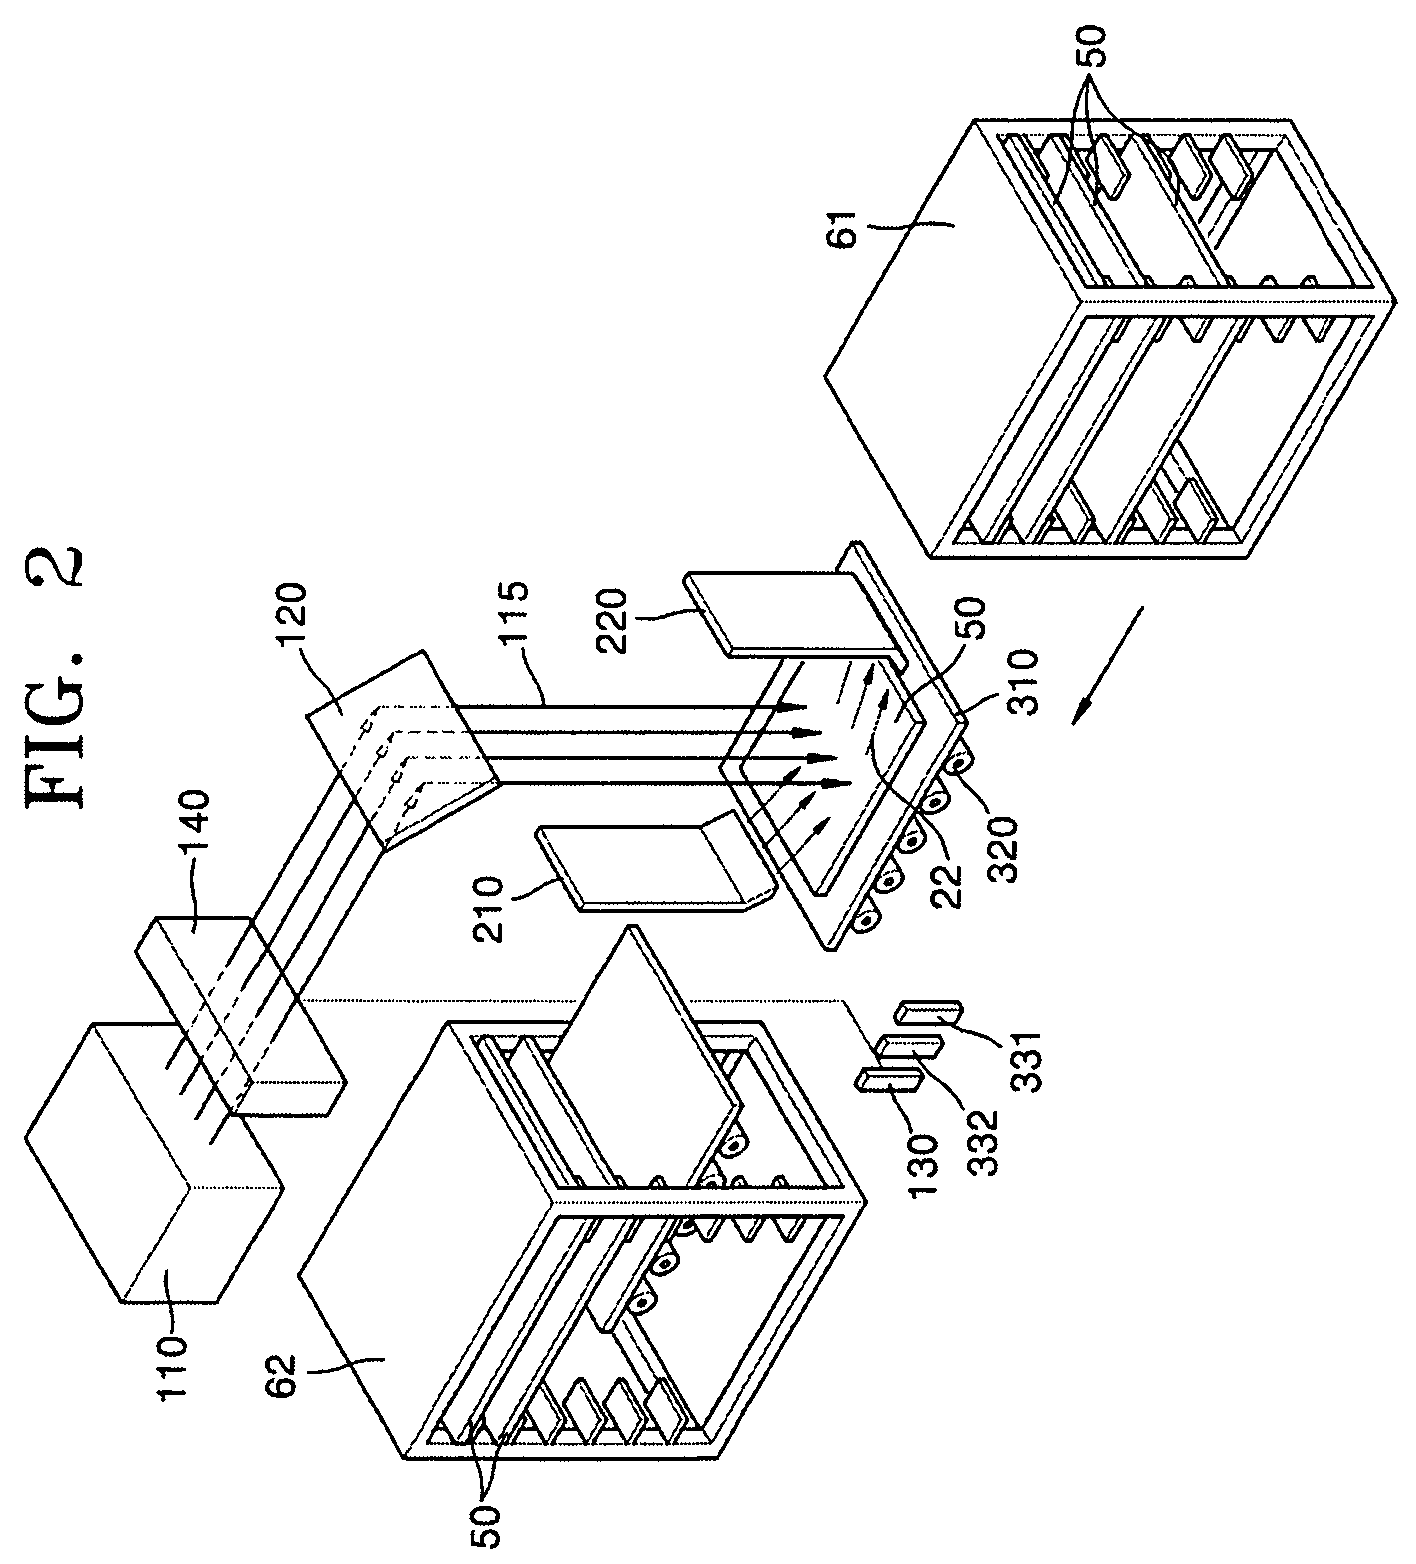 Laser annealing apparatus for processing semiconductor devices in inline manner